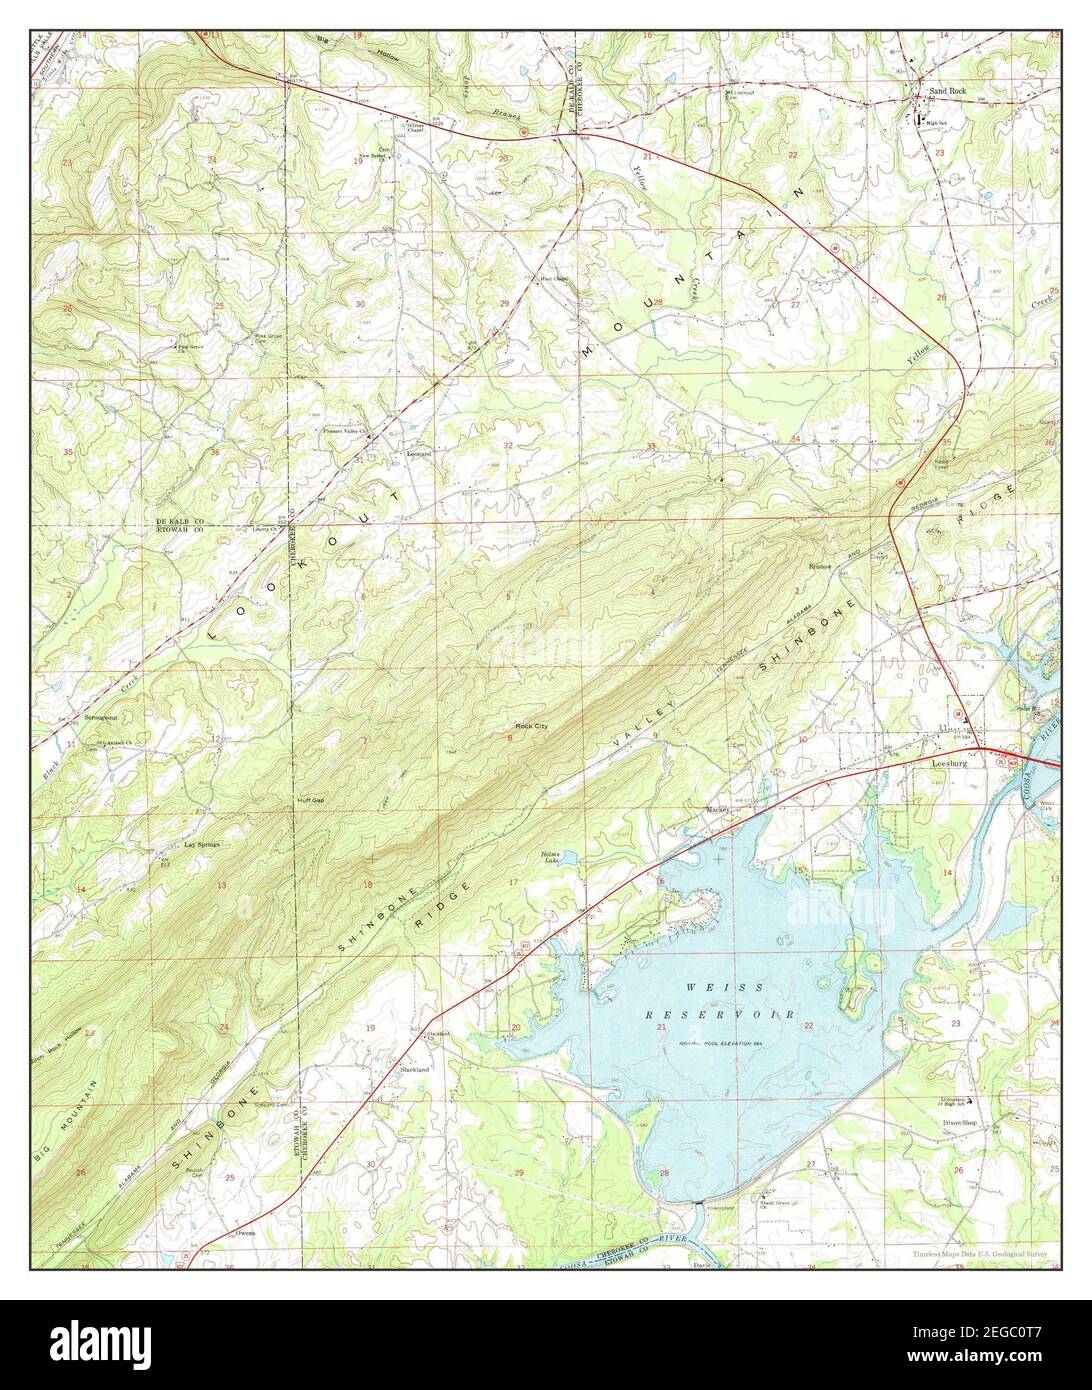 Leesburg, Alabama, map 1967, 1:24000, United States of America by Timeless Maps, data U.S. Geological Survey Stock Photo